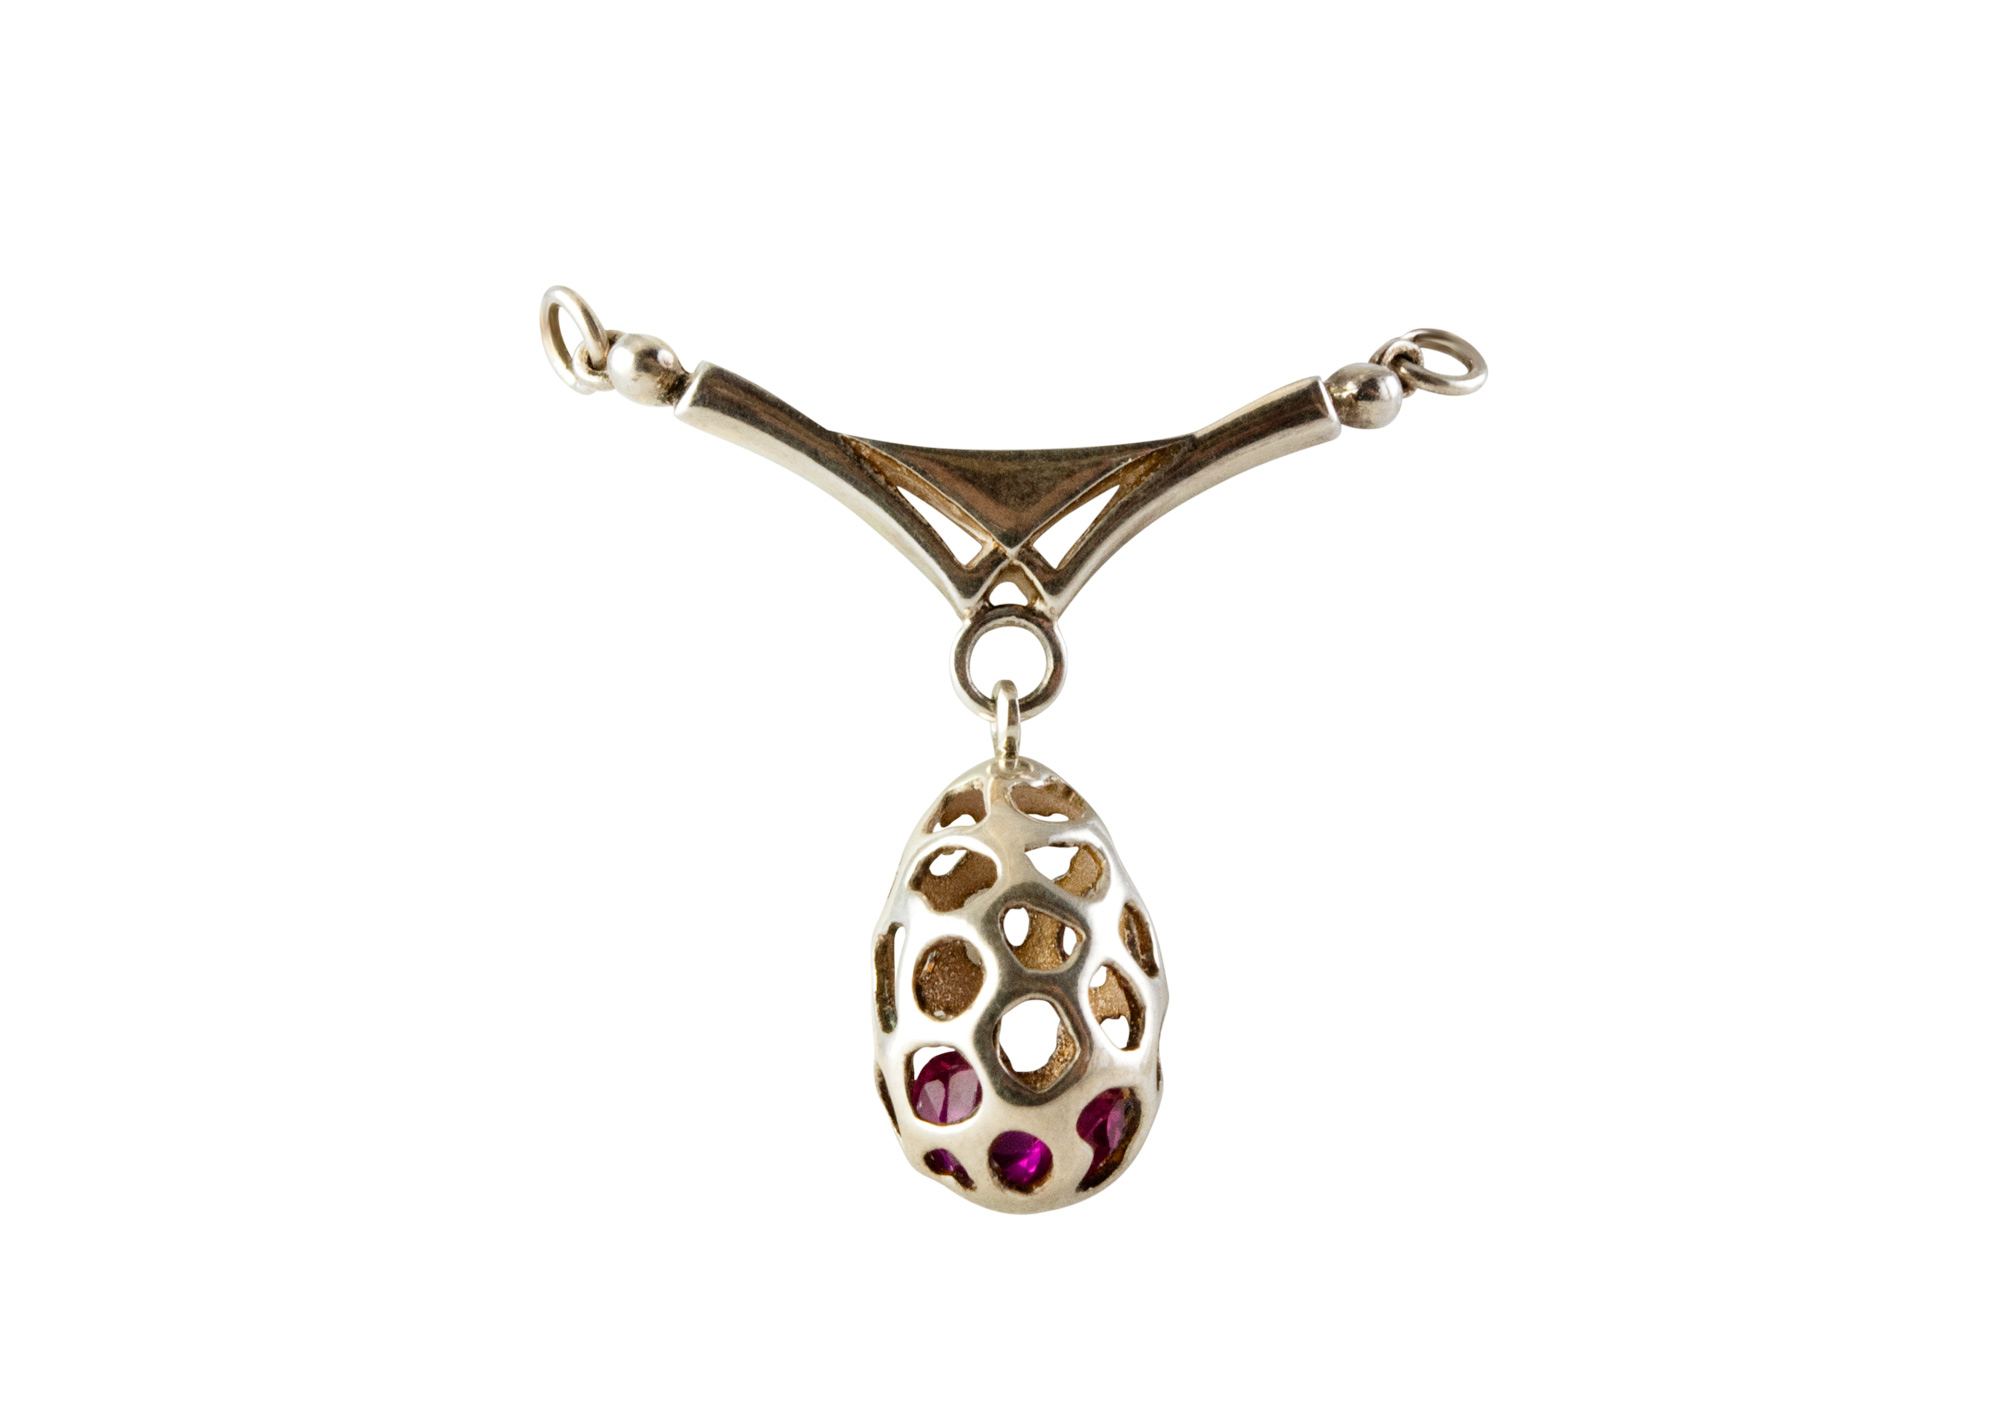 Buy Silver Pendant Holds Red Gems (w/ Chain!) at GoldenCockerel.com